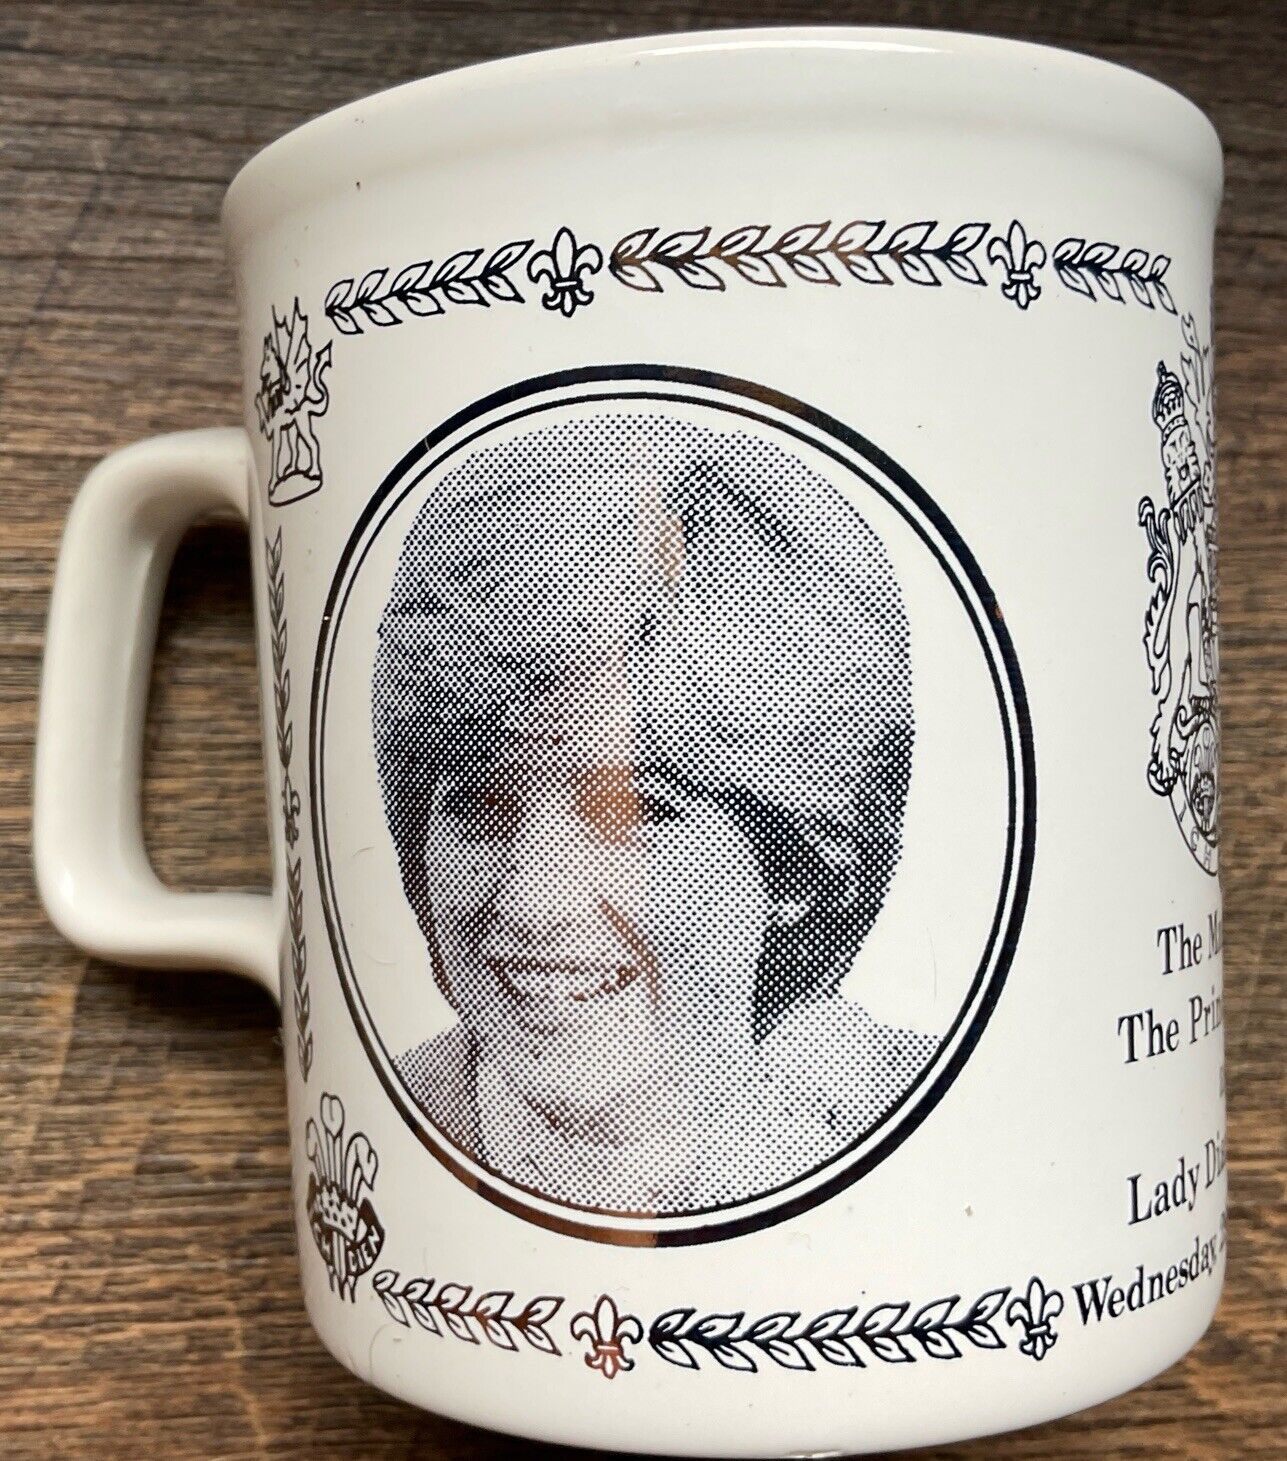 1981 Coffee Cup Marriage of Prince Charles of Wales Lady Diana Spencer Princess